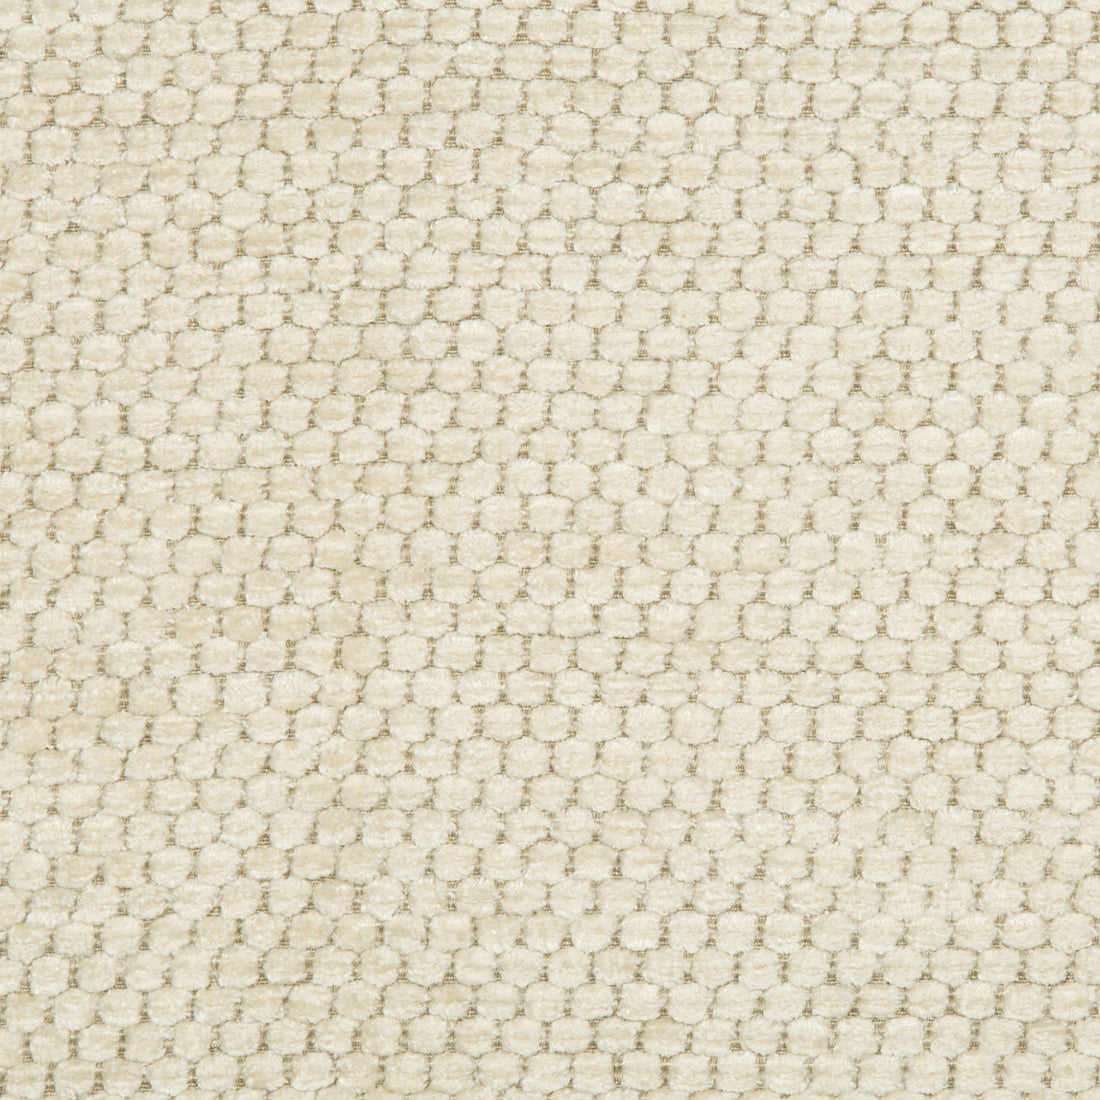 Lonsdale fabric in beige color - pattern 2016125.16.0 - by Lee Jofa in the Furness Weaves collection